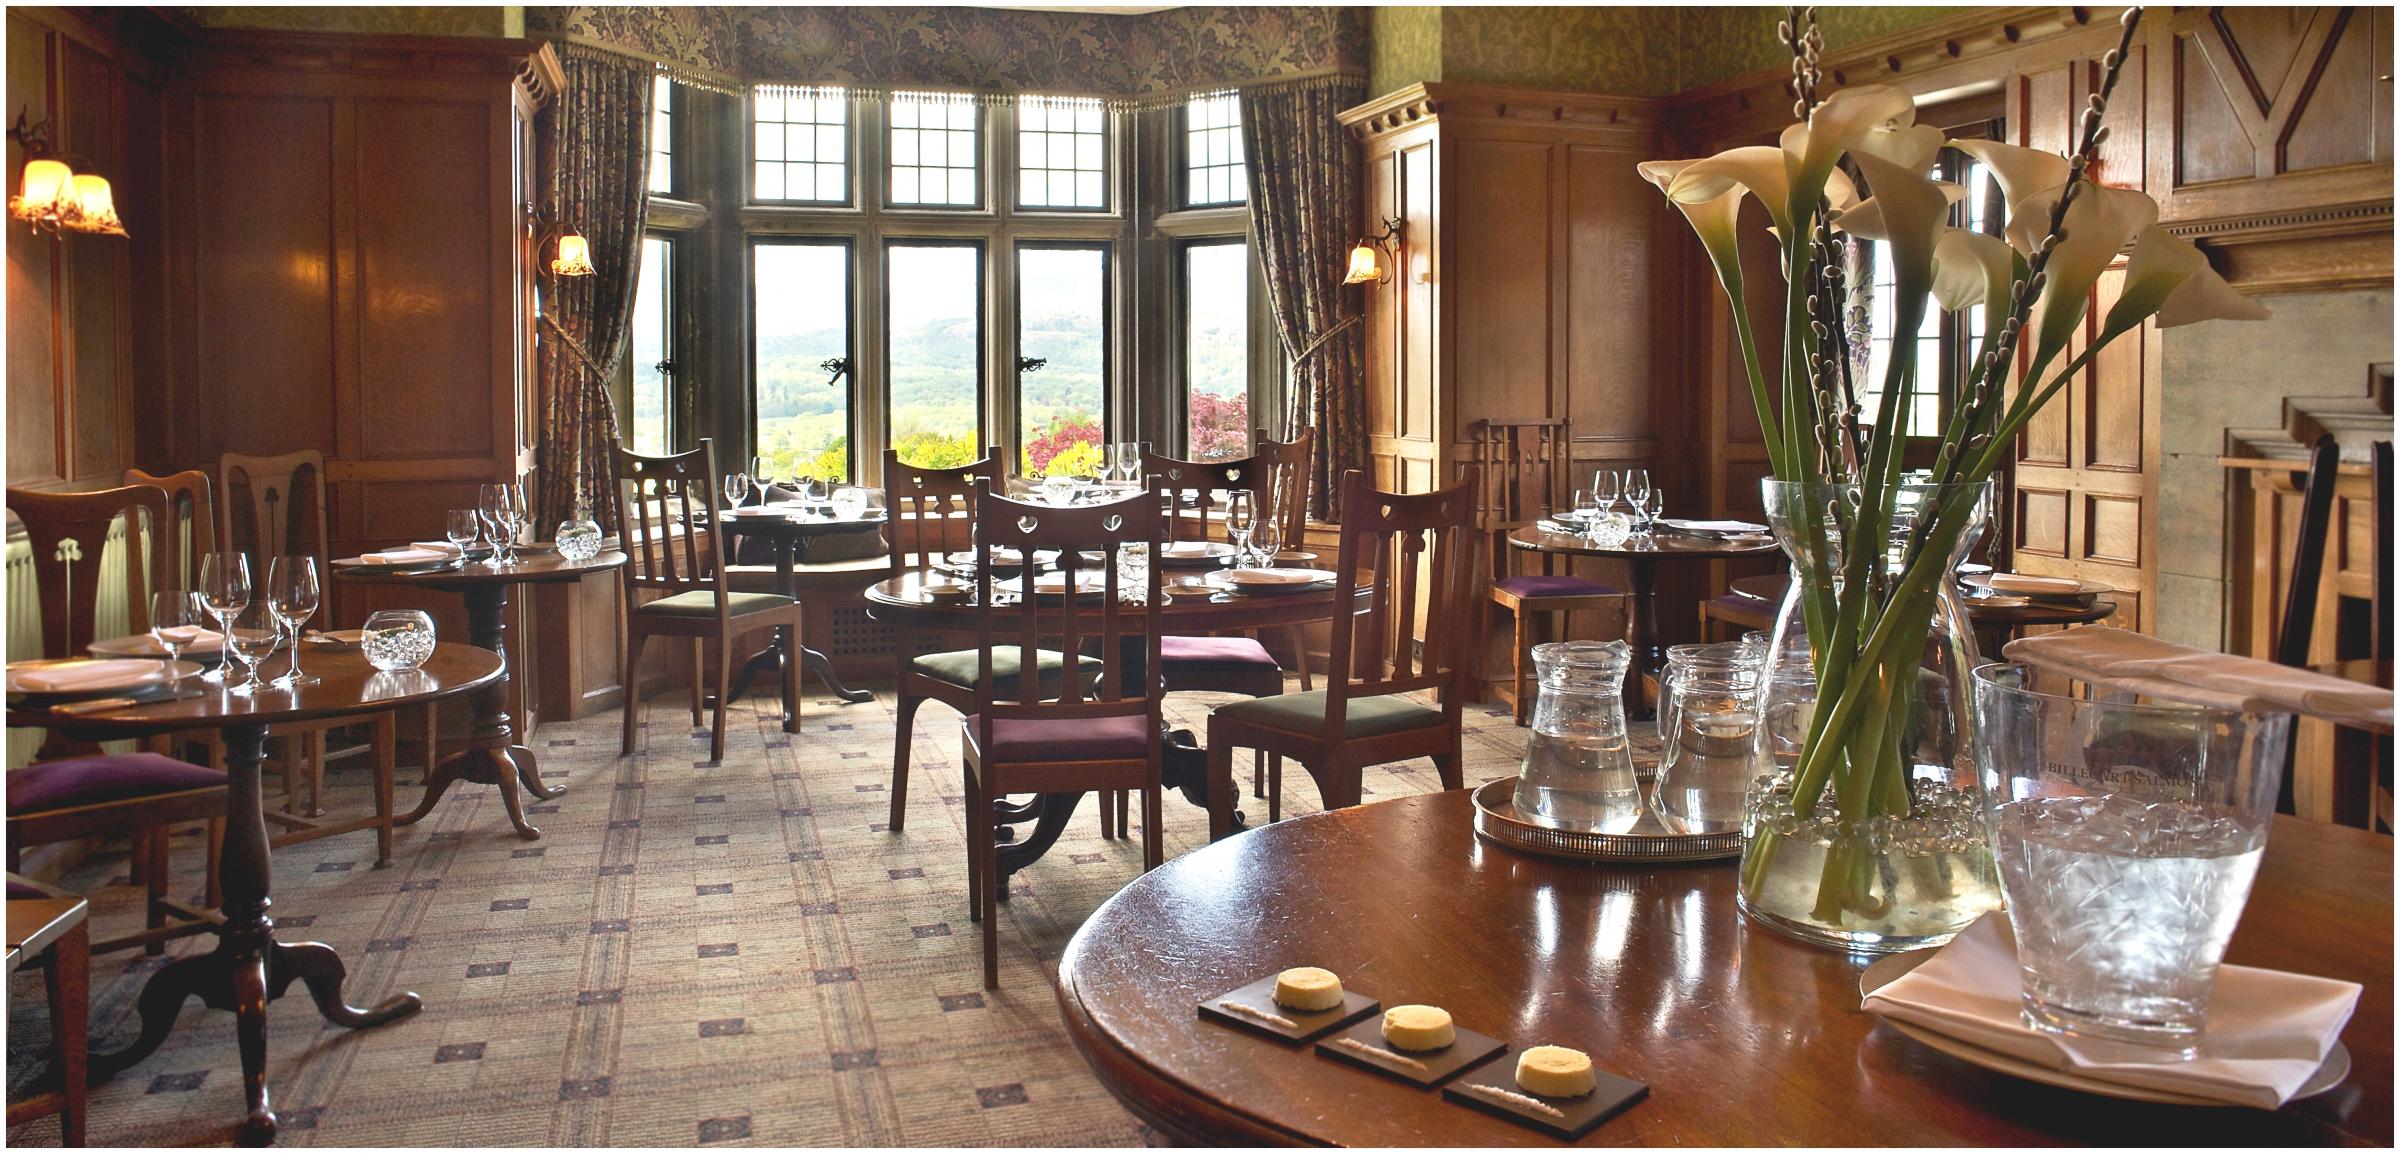 The Oak Restaurant at Holbeck Ghyll